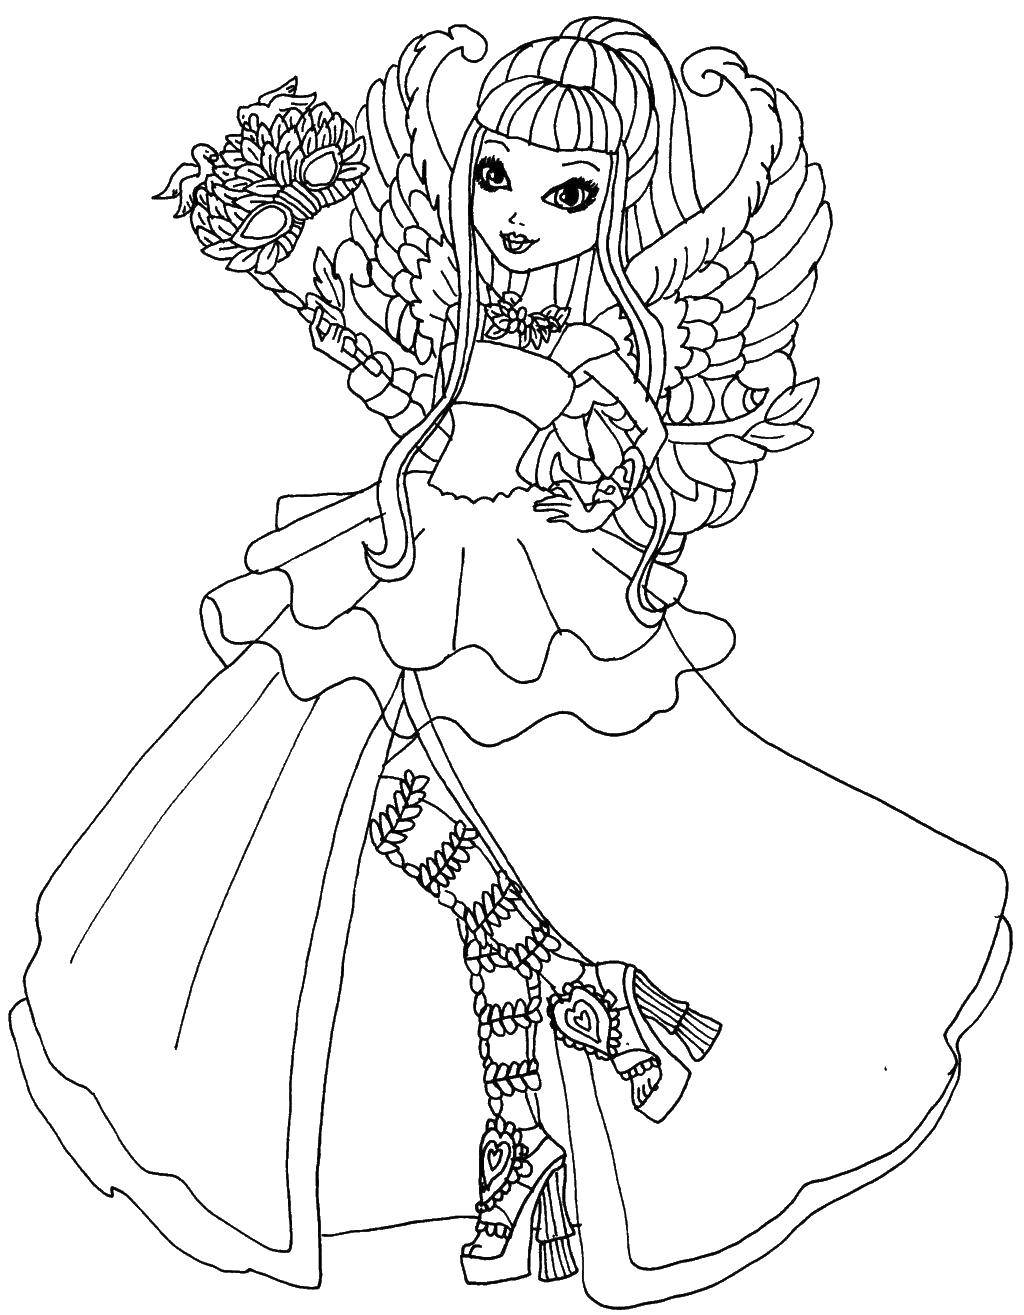 Coloring Si Hey, Cupid daughter of the God Eros, the goddess Aphrodite. Category eah school. Tags:  ever after high, C. A. Cupid.